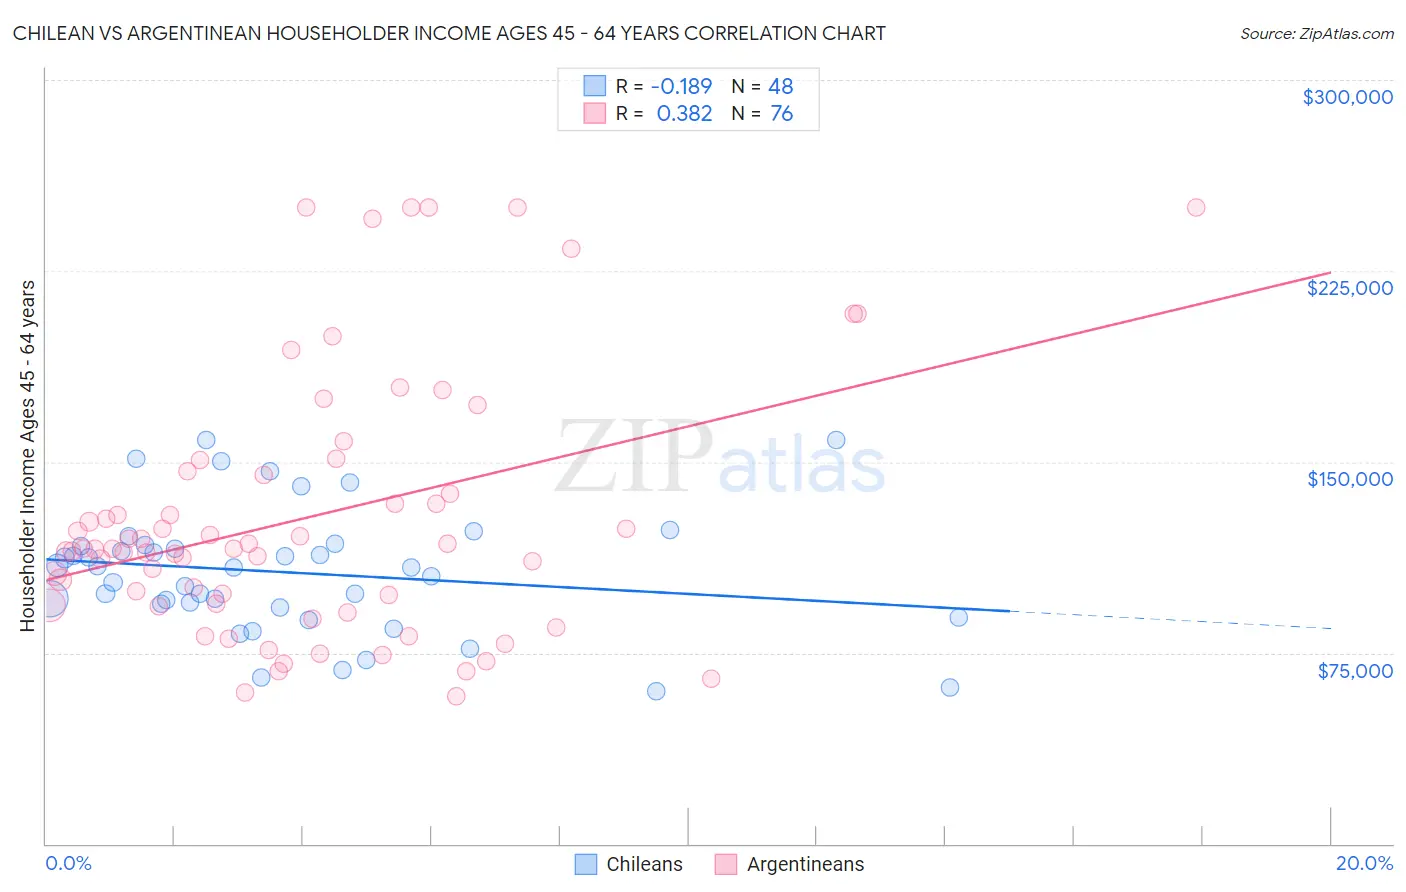 Chilean vs Argentinean Householder Income Ages 45 - 64 years